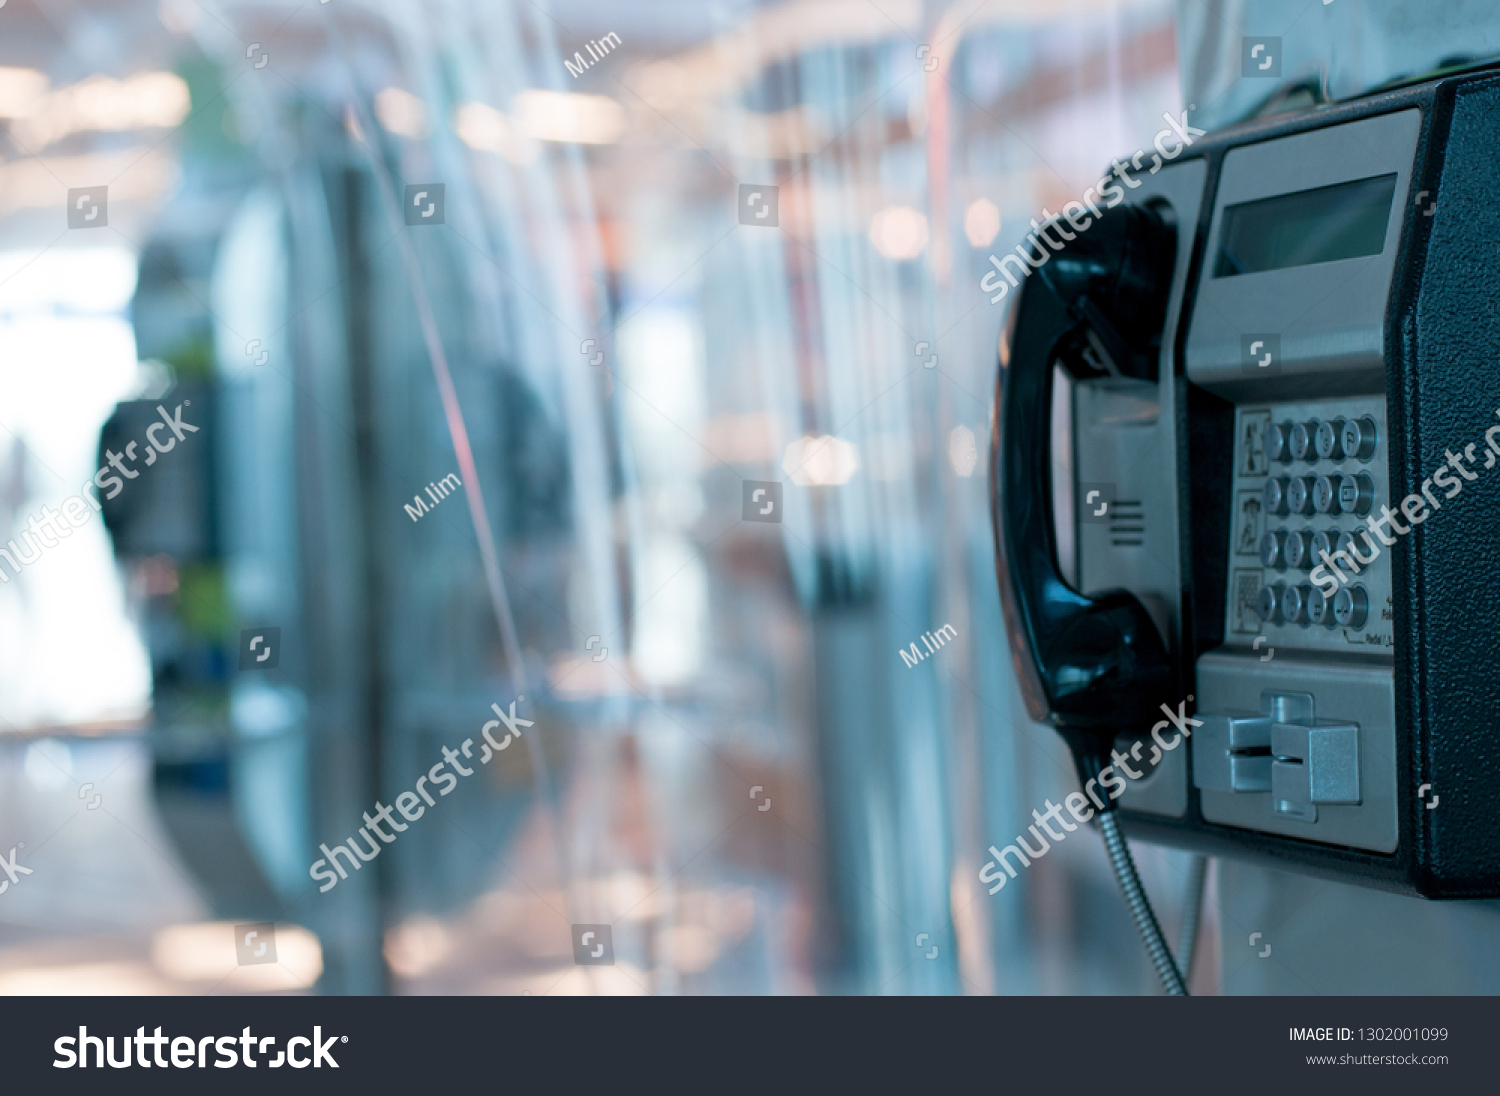 Public payphone in an airport building and blur background #1302001099